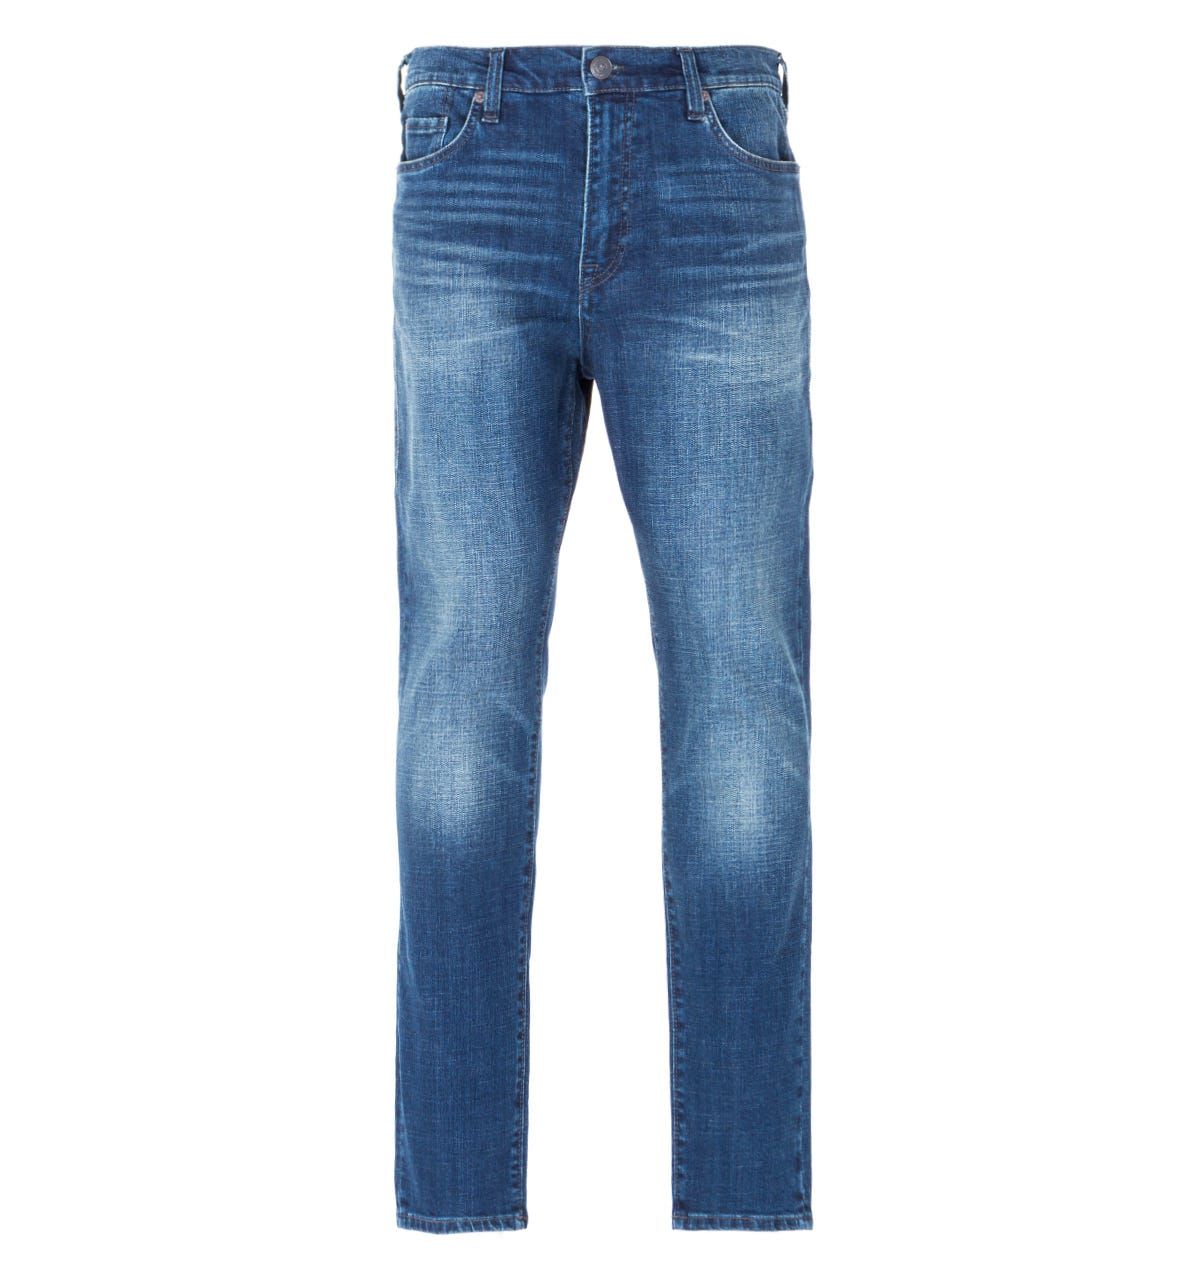 <p>True Religion are global denim experts who have redesigned and reinvented the traditional five pocket jean for the modern man. Founded in L.A. back in 2002 and quickly became known for quality craftsmanship, bold design and the iconic lucky horseshoe logo. The Mick Slouchy Skinny Fit Jeans are the perfect addition to refresh your jeans collection this season.</p><ul><li>Slouchy Skinny Fit - Slim Tapered Fit in the Leg with a Relaxed Fit Up Top</li><li>Cotton Blend Composition</li><li>Five-Pocket Design</li><li>Fading & 3D Whiskering Detailing</li><li>Signature Gold Stitching</li><li>True Religion Branding</li></ul><p>Style & Fit:</p><ul><li>Slouchy Skinny Fit</li><li>Fits True to Size</li></ul><p>Composition & Care:</p><ul><li>98% Cotton</li><li>2% Elastane</li><li>Machine Wash</li></ul>